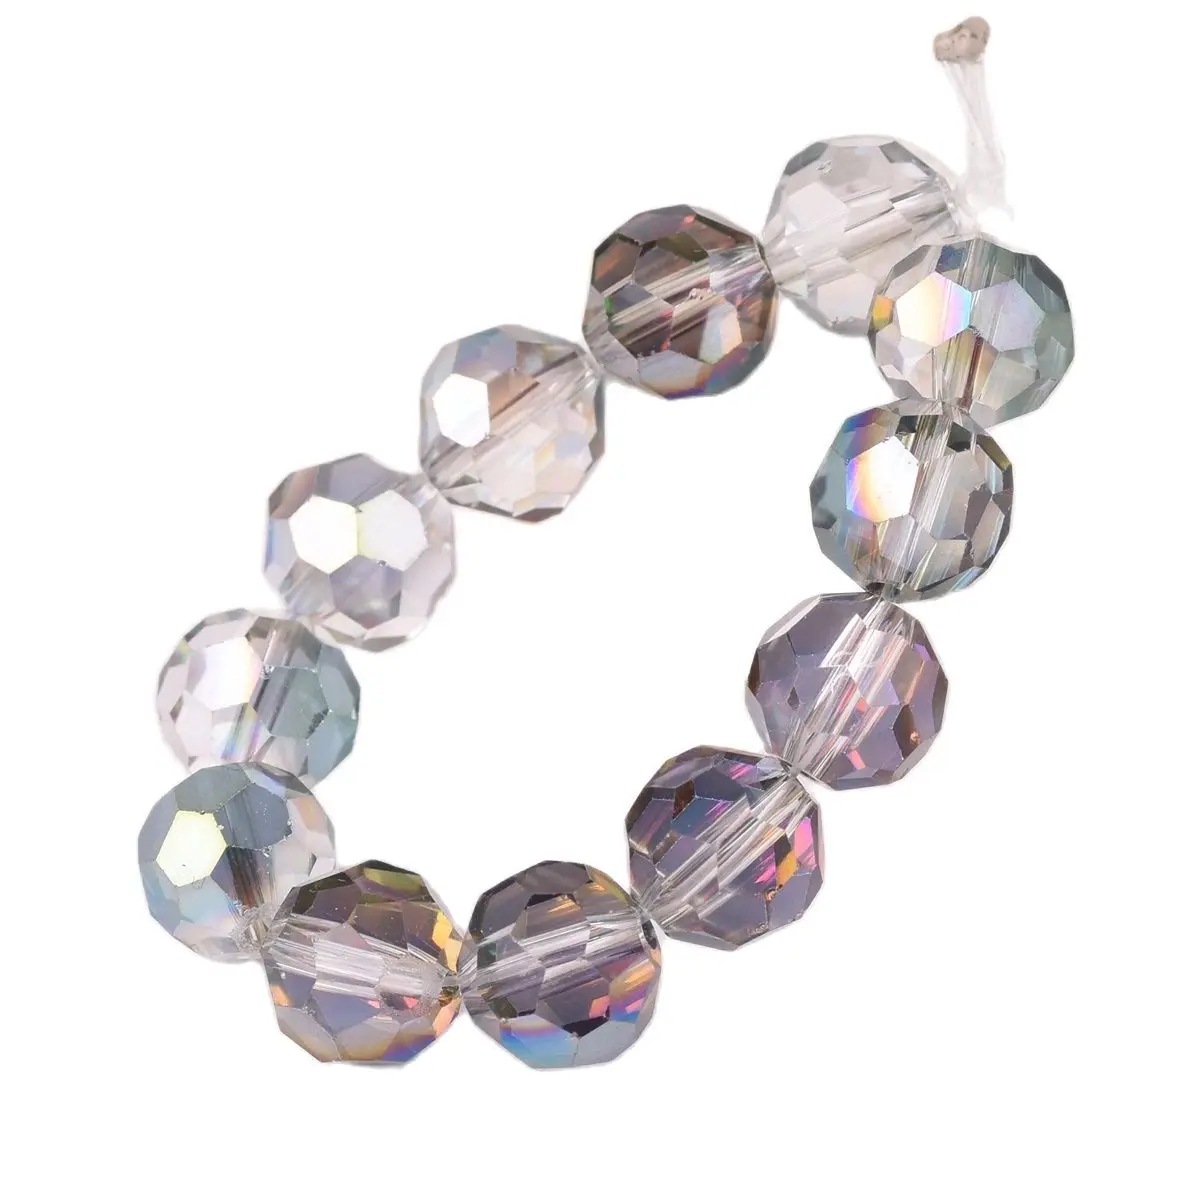 20pcs Rose Green Round 32 Facets Faceted Crystal Glass Loose Beads for Jewelry Making DIY Crafts